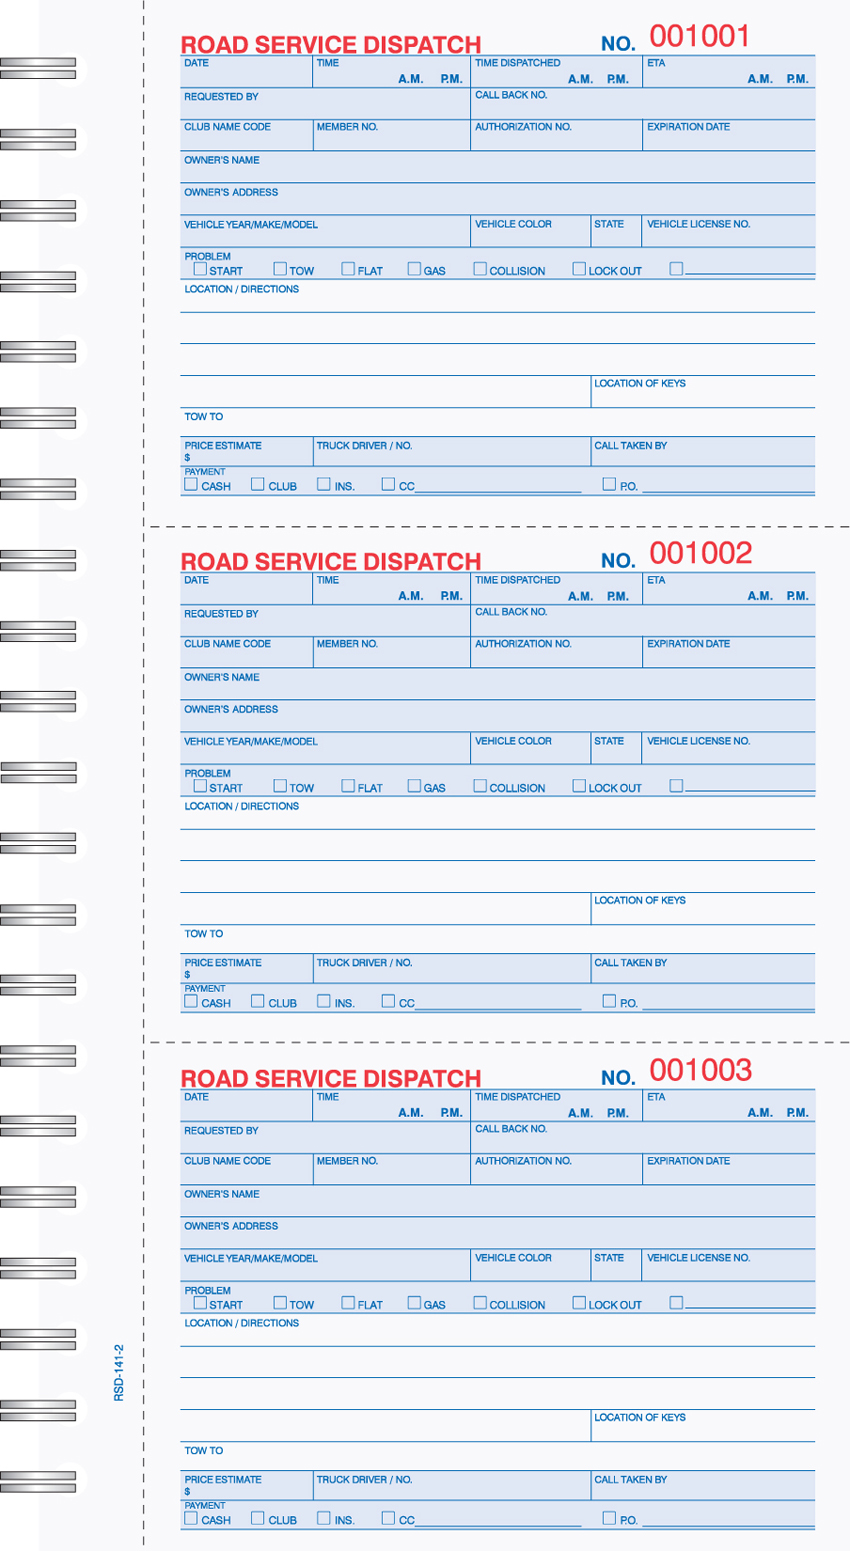 "Road Service Dispatch Book - Booked -3.66" x 5" 2 Part"